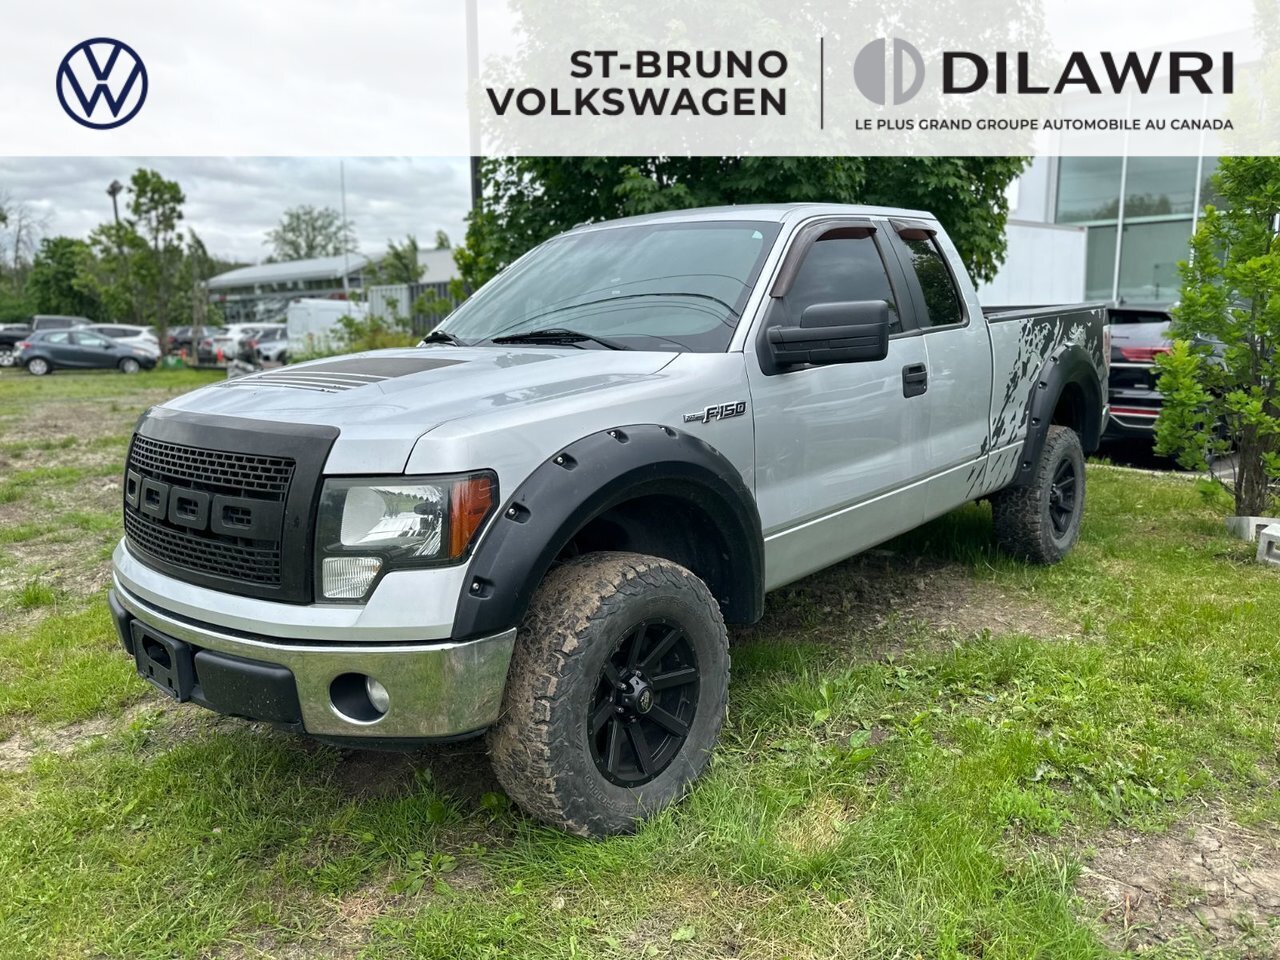 2011 Ford F-150 XLT | 5.0L | 4X4 | Cabine Double Clean Carfax / Cl